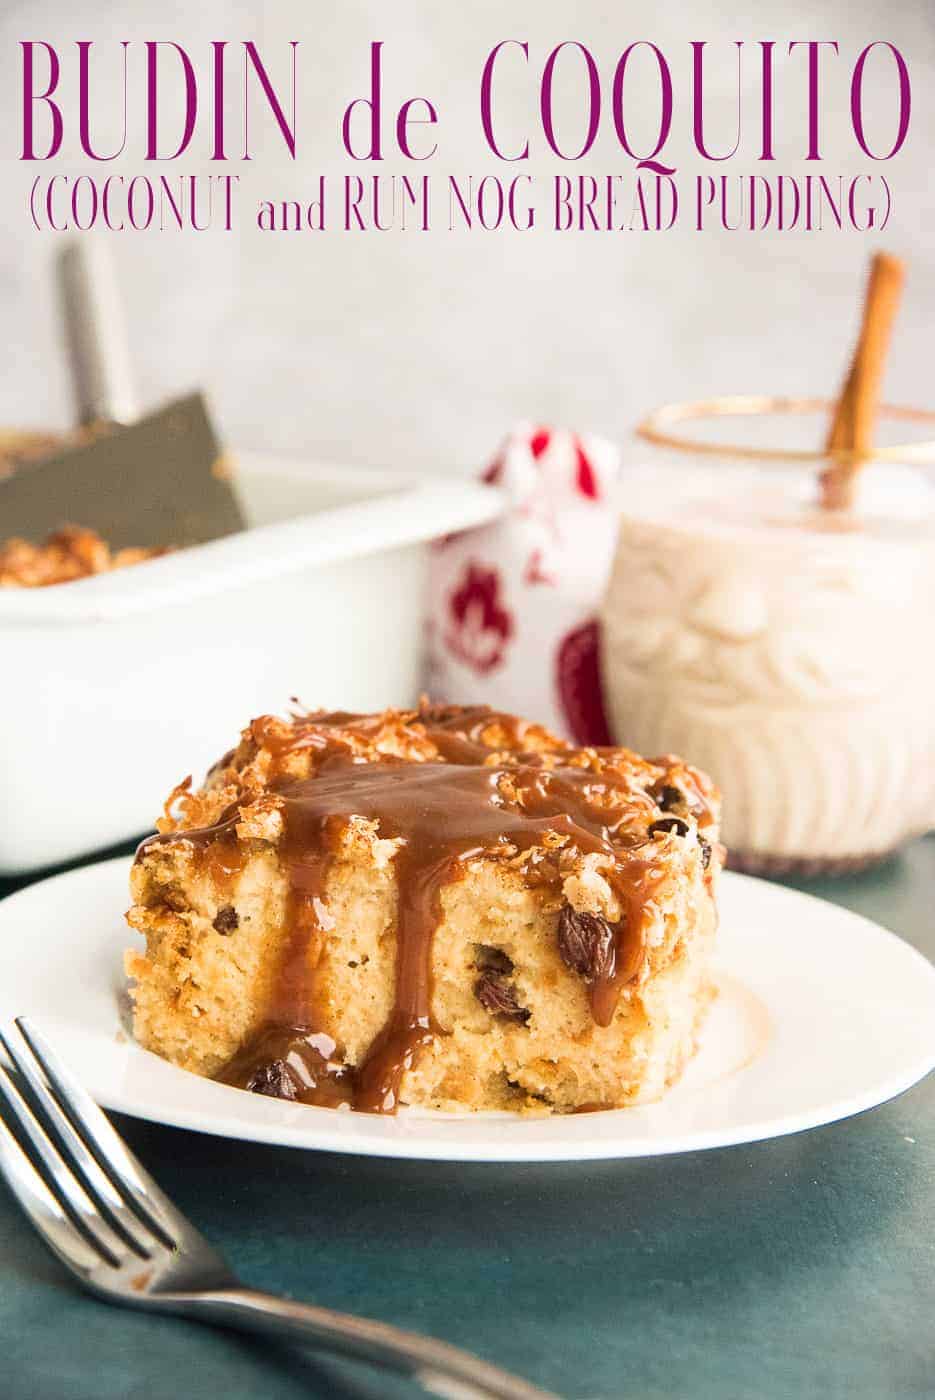 Coquito Bread Pudding with Coquito Toffee Sauce combines the favorite coconut and rum cocktail in a comforting dessert recipe. Make yours with virgin coquito or spike it for a boozy version. Prepared with or without raisins to suit your preferences. #coquito #coquitobreadpudding #budindecoquito #pansobao #coconutrum #coconuteggnog #coconutnog #ponchedecoco #ponche #baking #dessertrecipe #coquitodessert via @ediblesense